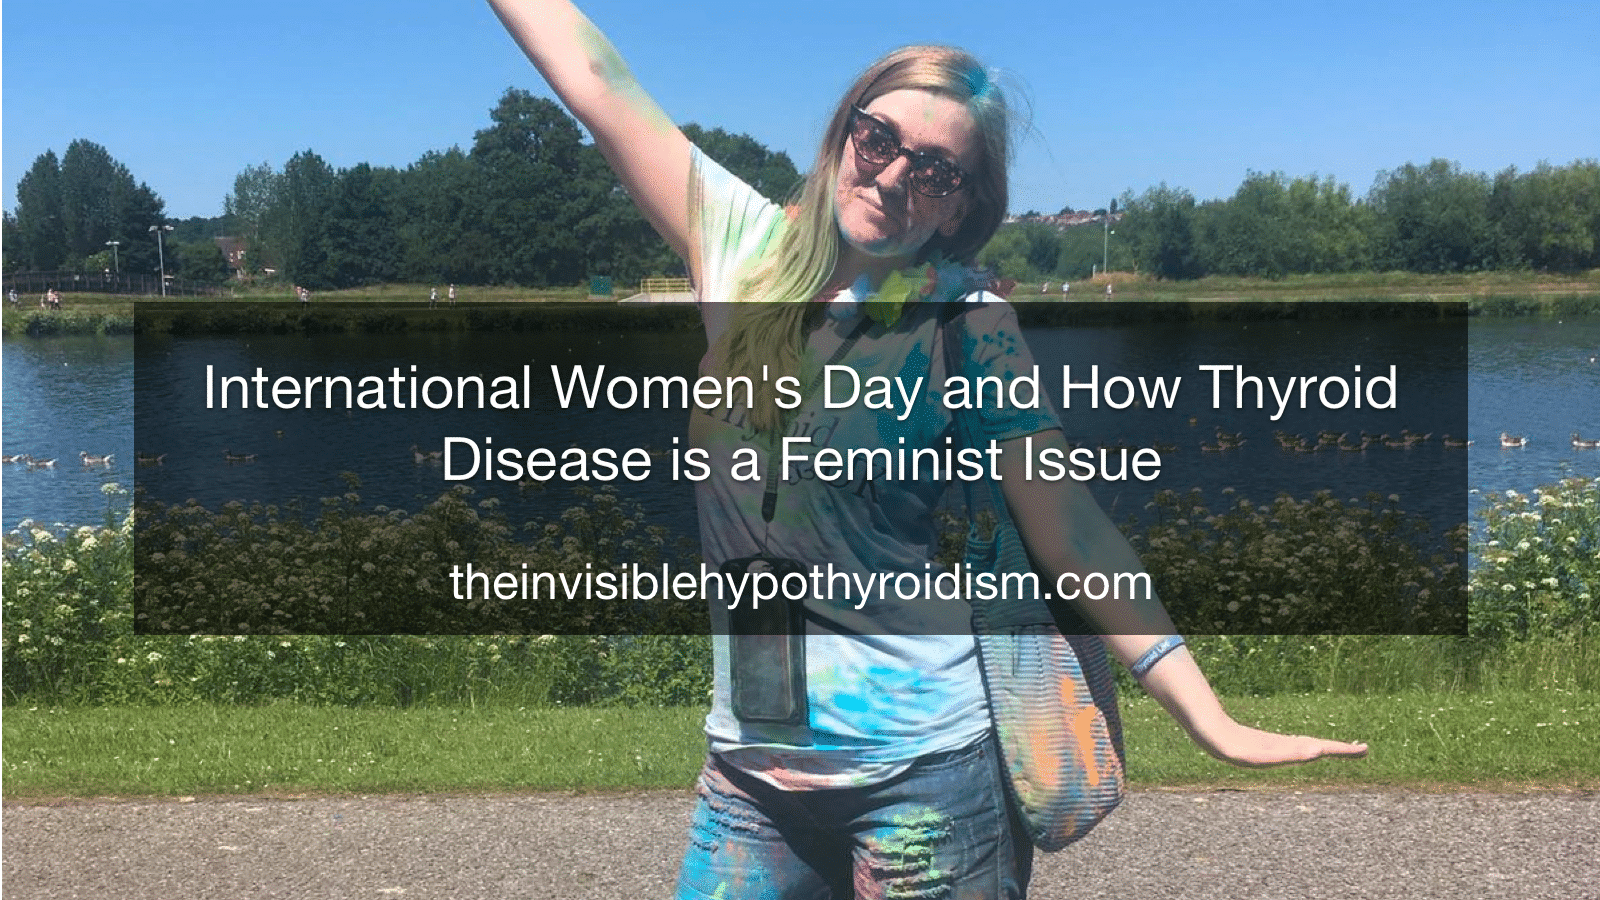 International Women's Day and How Thyroid Disease is a Feminist Issue